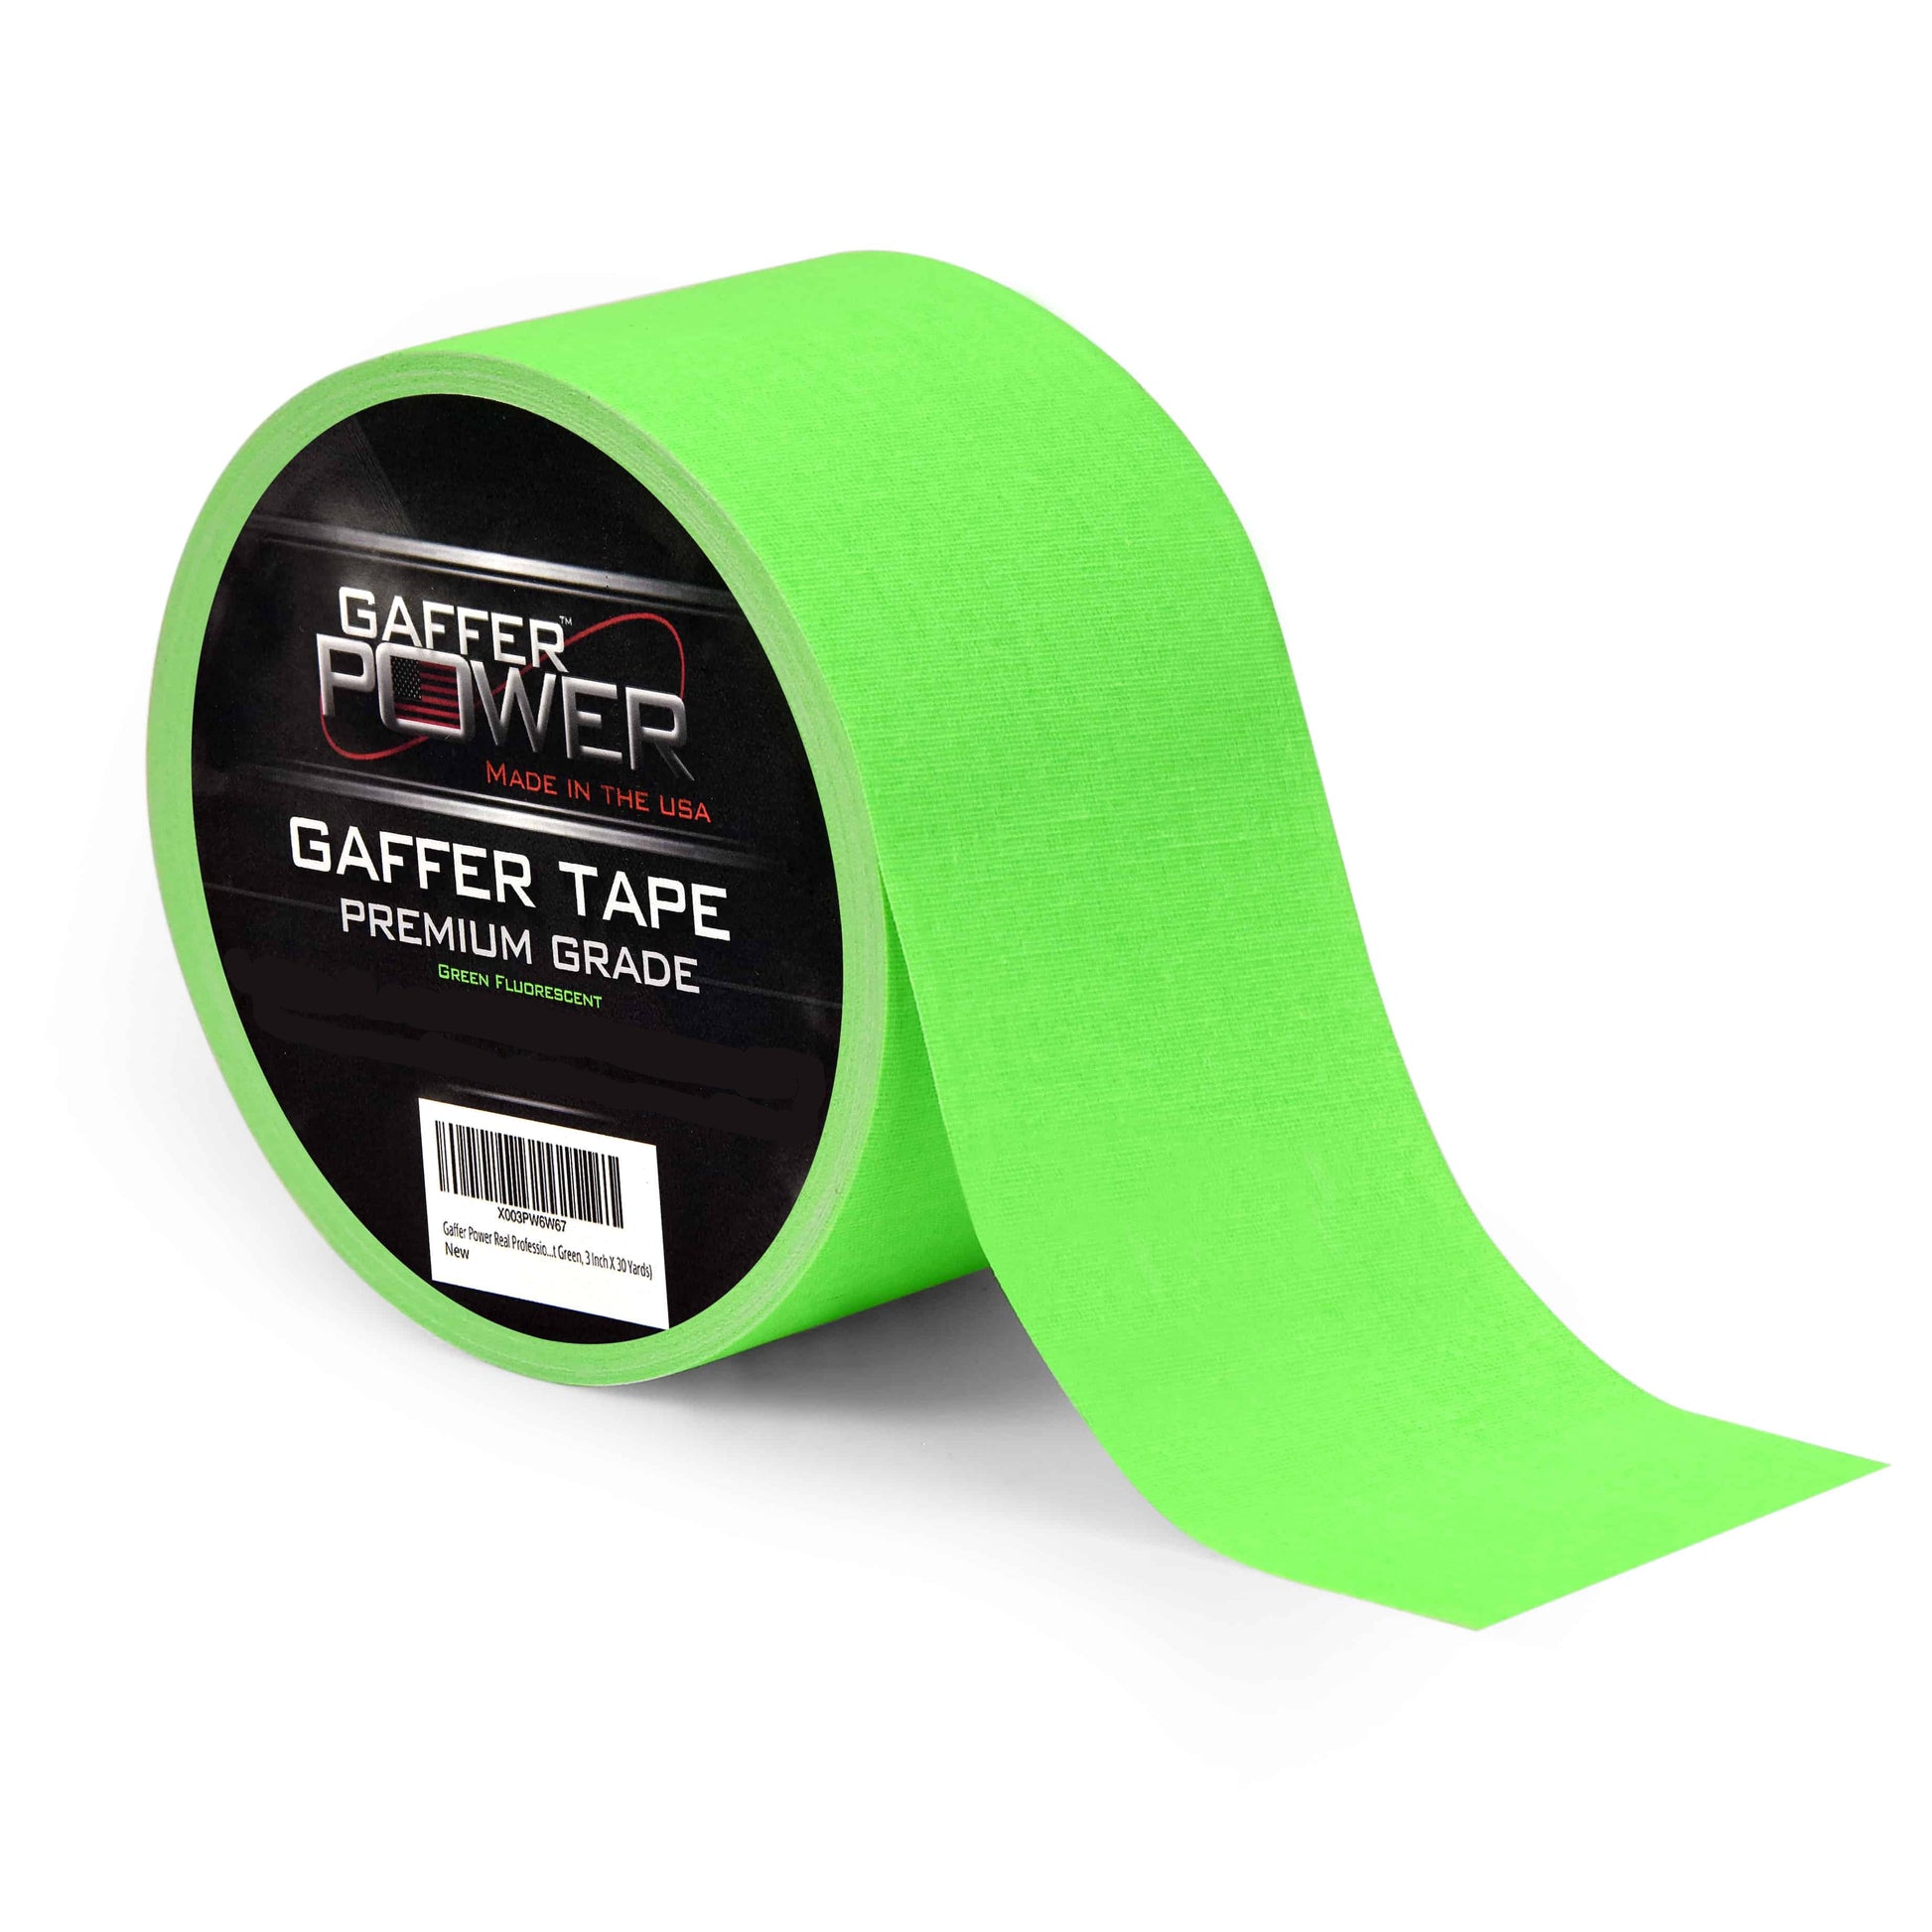 Gaffer Power Real Professional Premium Grade Gaffer Tape 4 Inch X 30 Yards,  Black- Made in The USA - Heavy Duty Gaffers Tape - Non-Reflective 